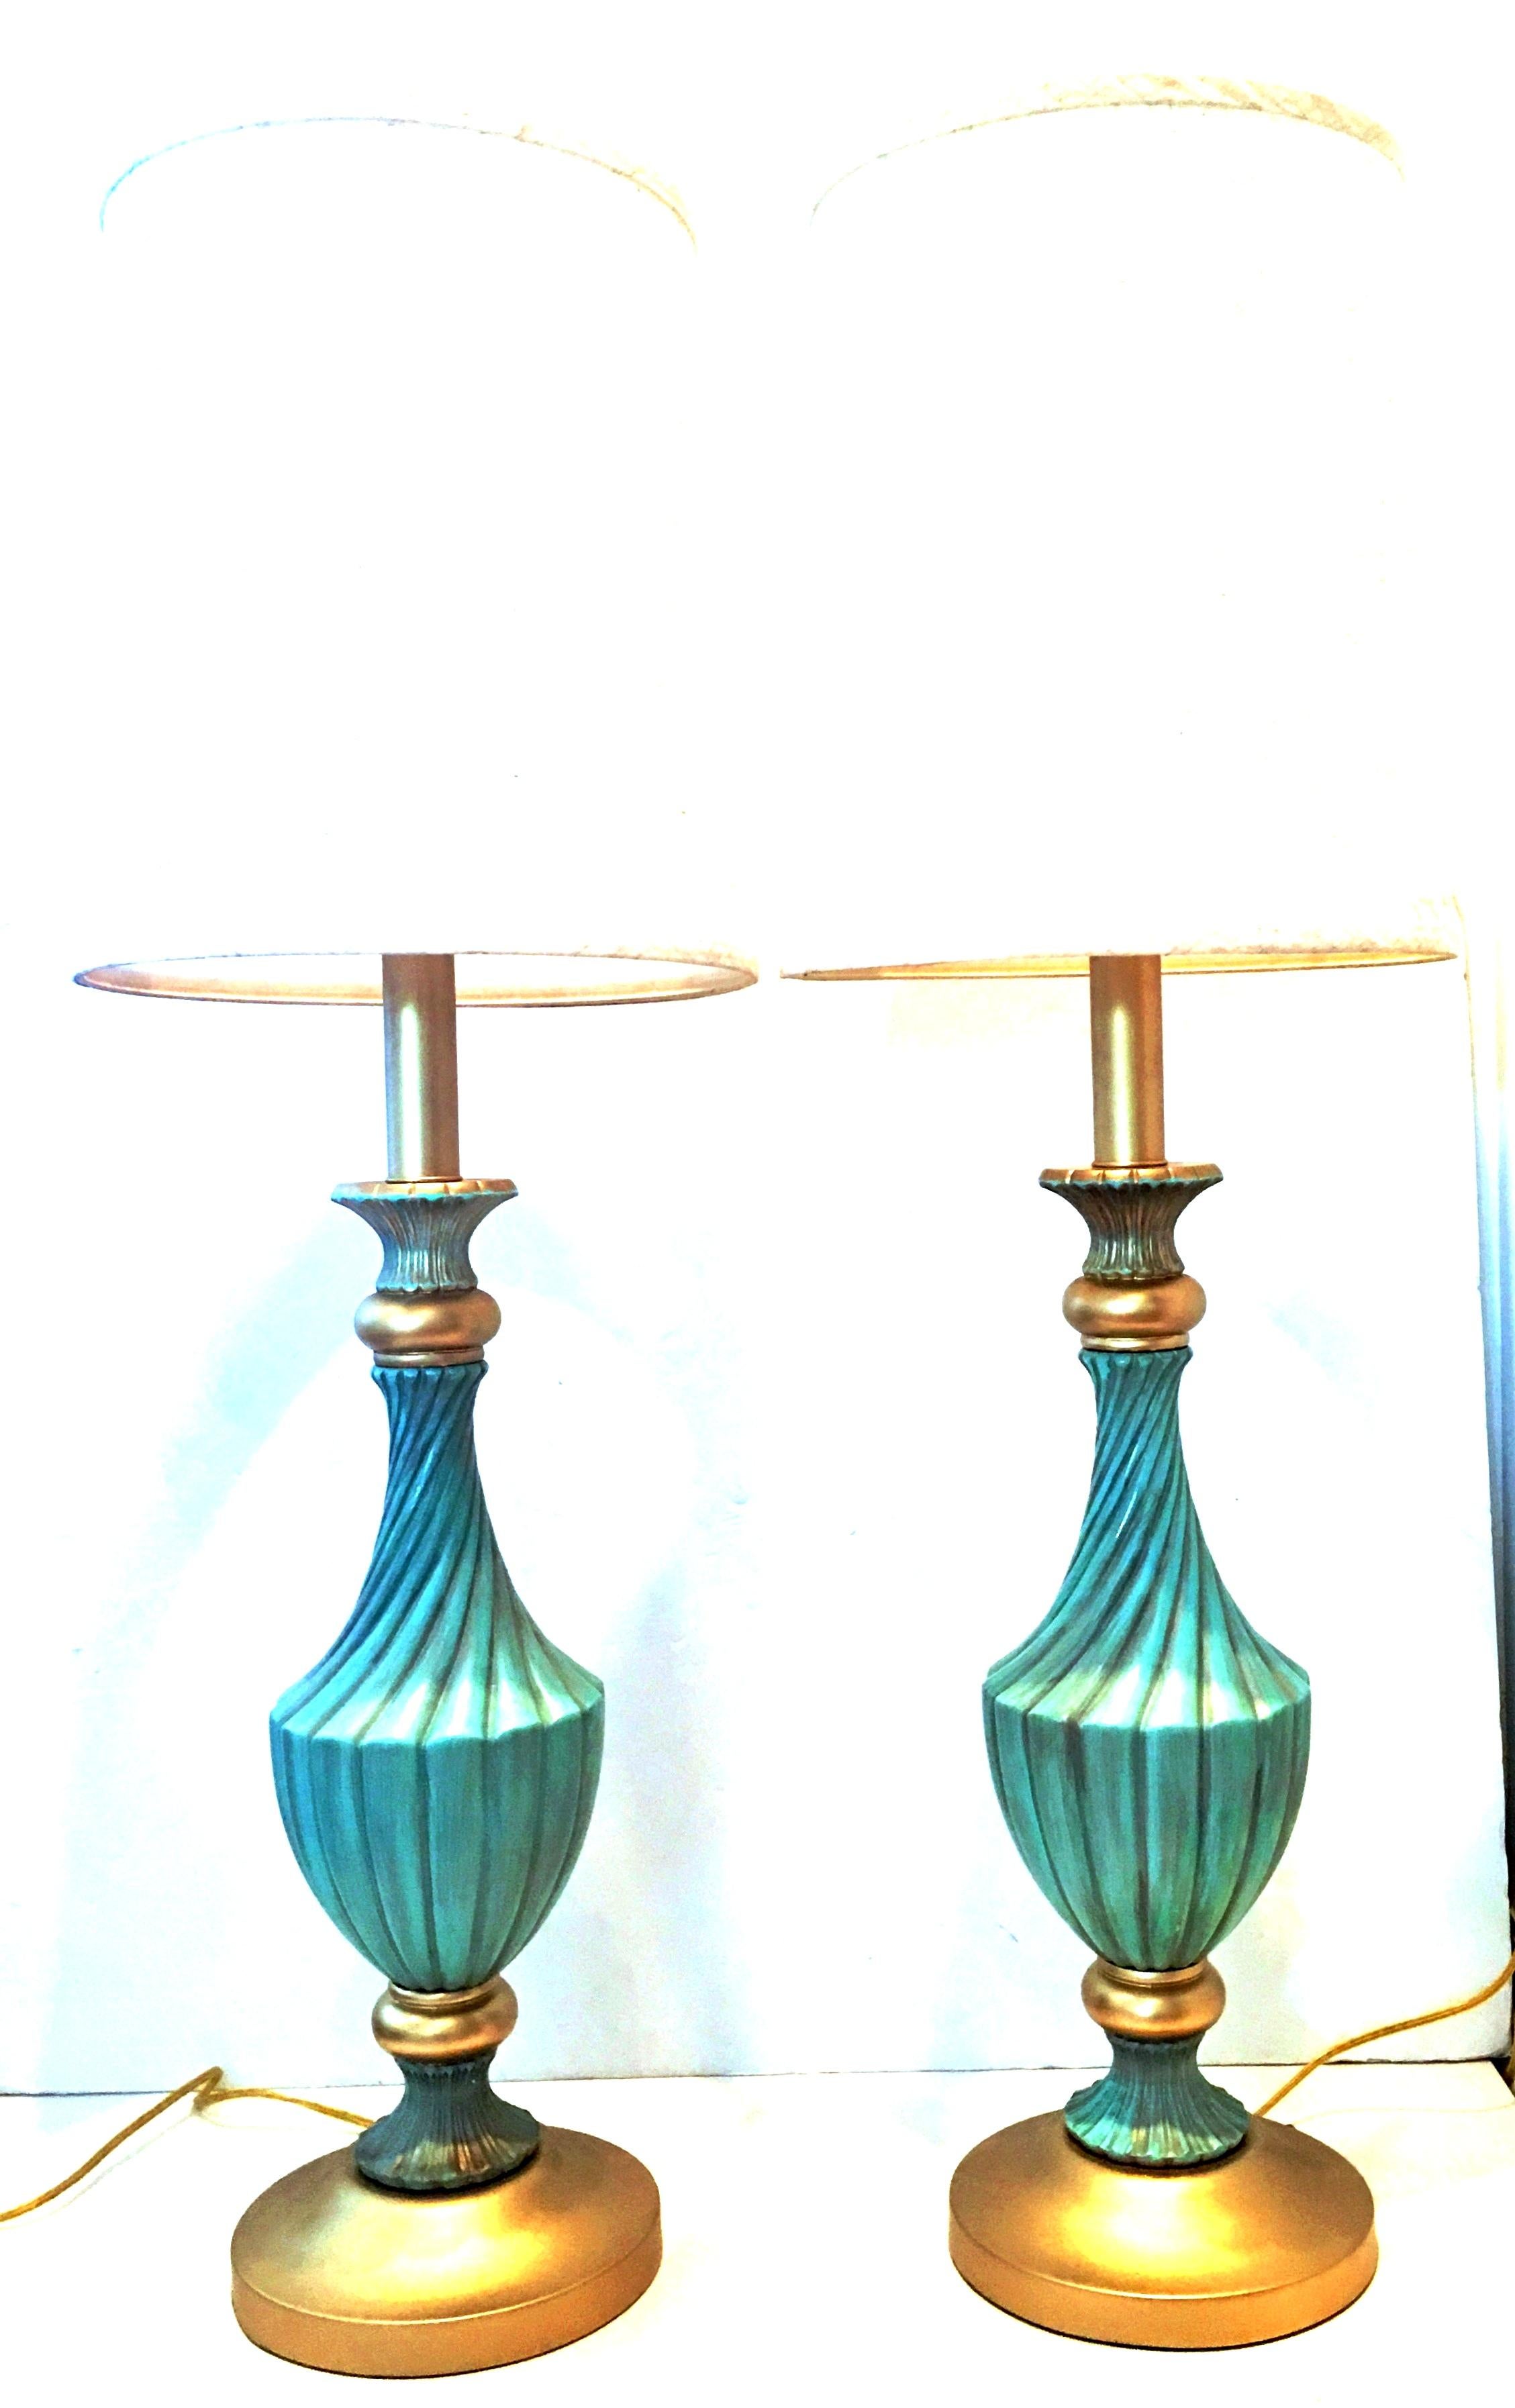 Midcentury neoclassical style pair of tall aqua & gold ceramic, wood and gilt brass table lamps by, Stiffel. Newly restored, converted to socket and harp style lamps with new electrical cords. The classic and timeless tall lamps feature, ceramic and